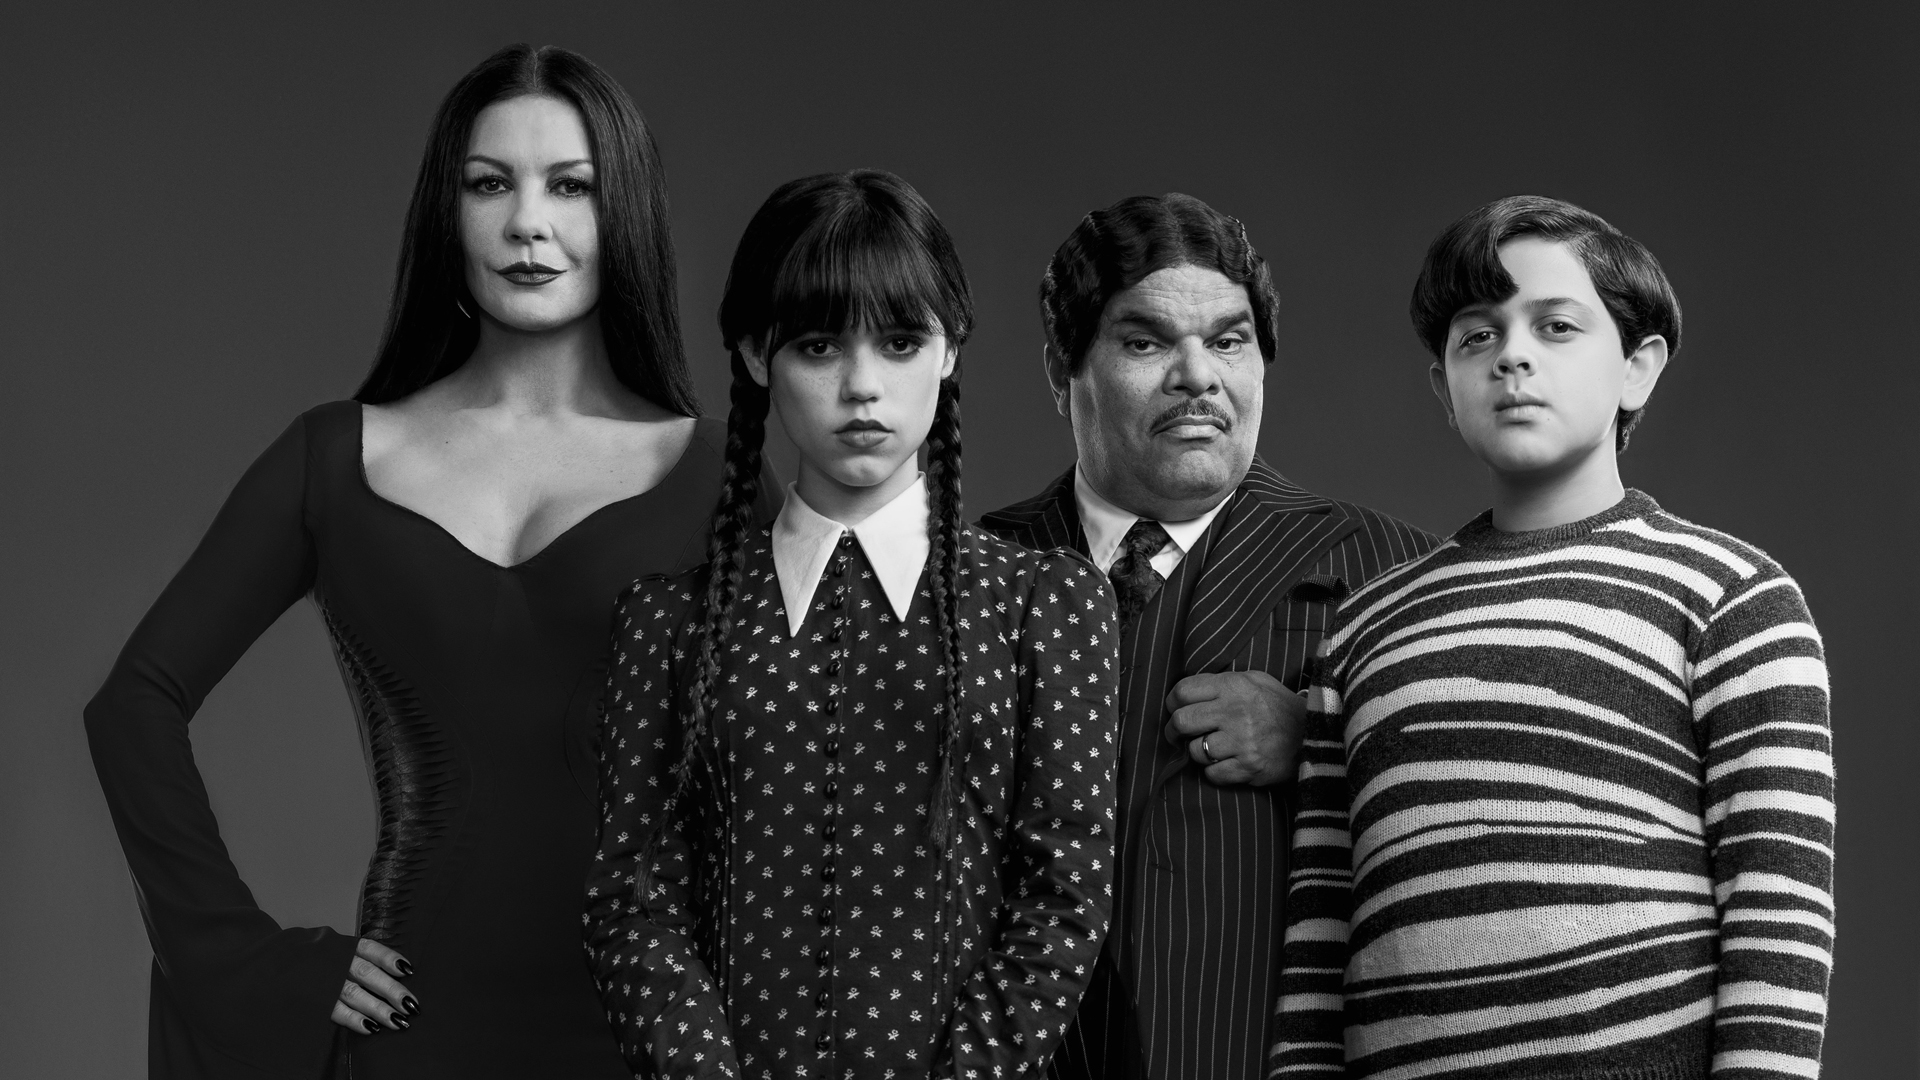 A black and white screenshot of the first Addams family image for Netflix's Wednesday Addams TV show